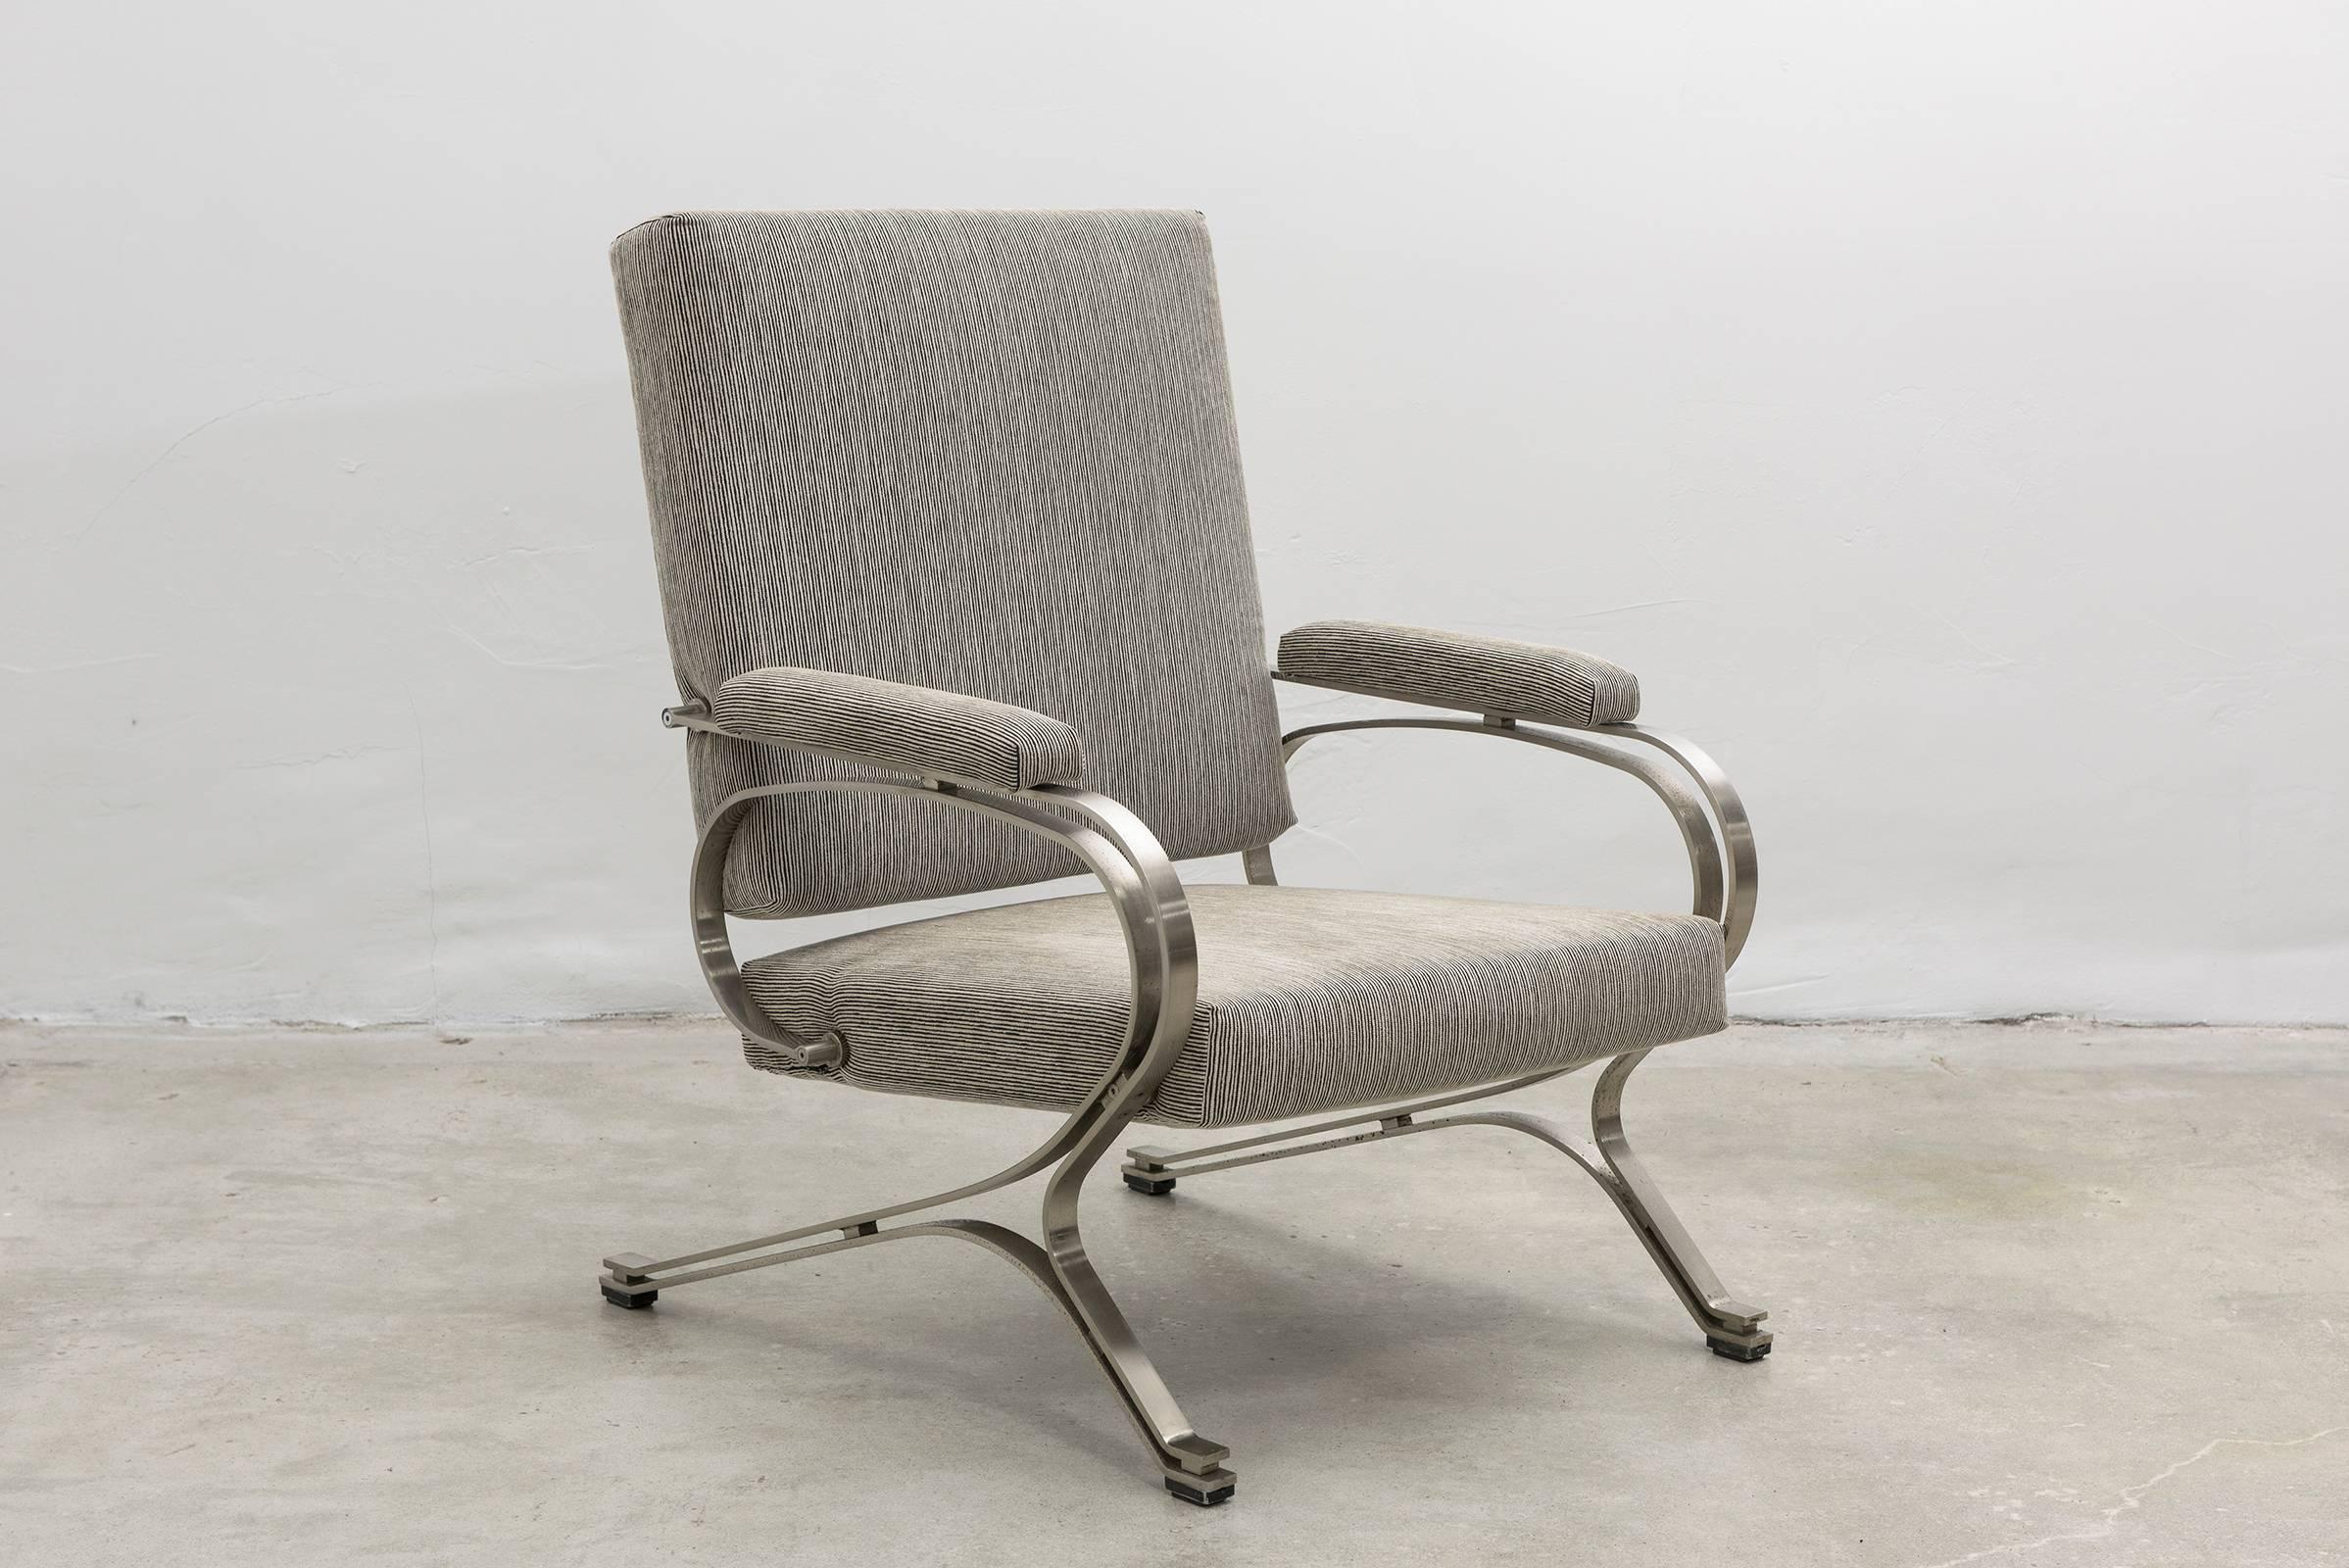 Rare vintage stainless steel armchair with matched ottoman by Giulio Moscatelli. Produced by Formanova, Milano. Expressive frame in stainless steel gives the chair some light bounce and give for comfort. Both armchair and ottoman newly